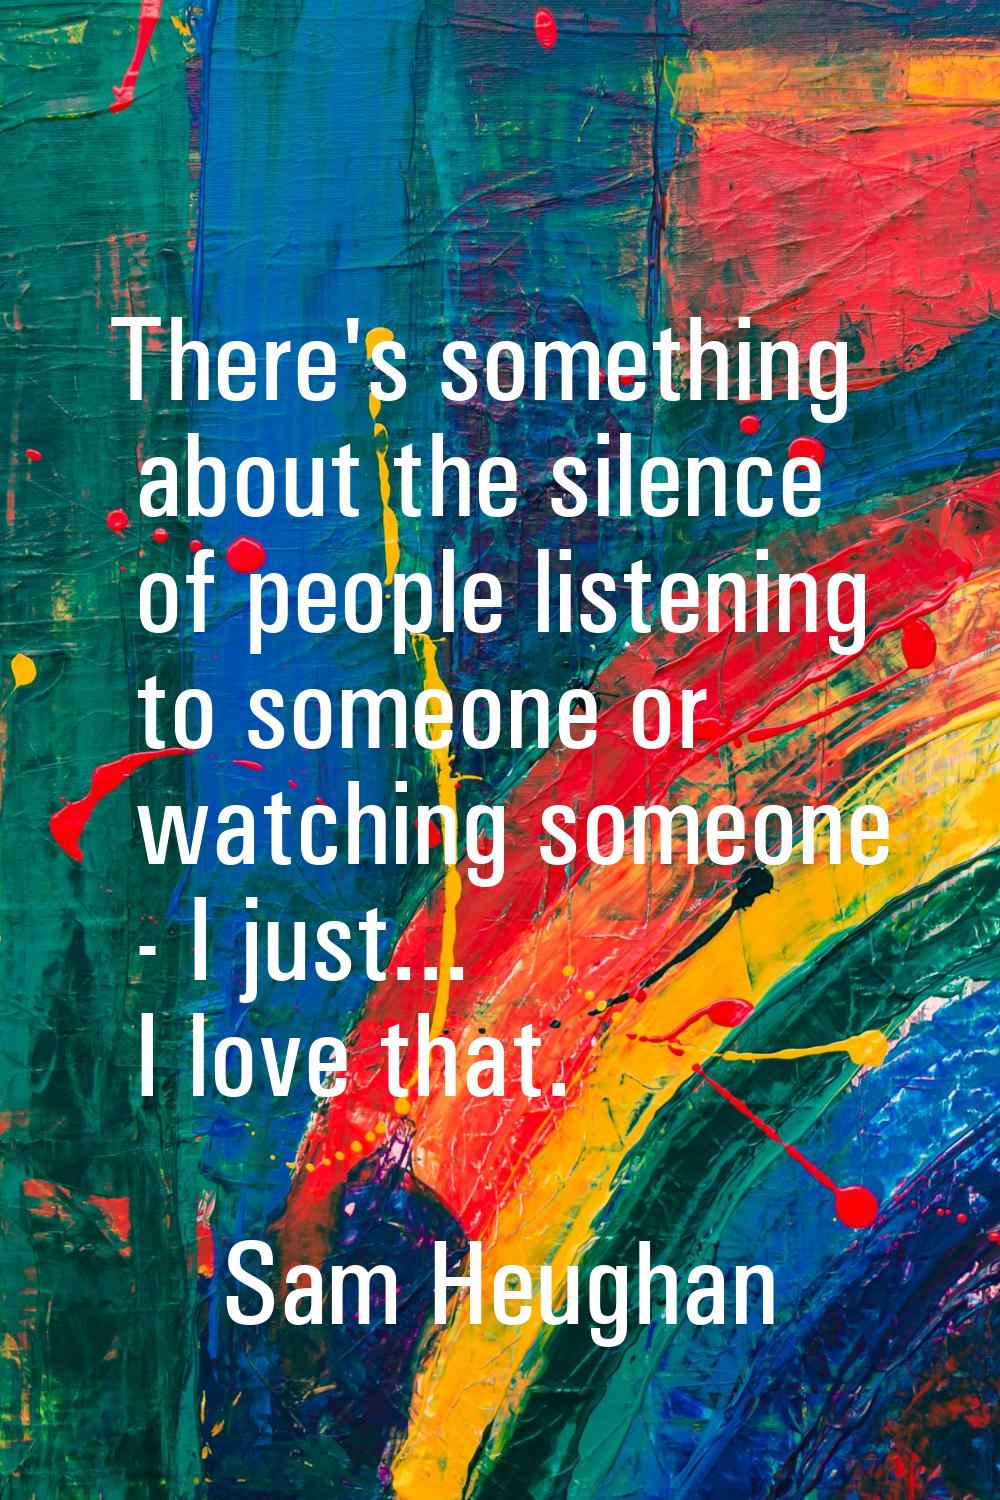 There's something about the silence of people listening to someone or watching someone - I just... 